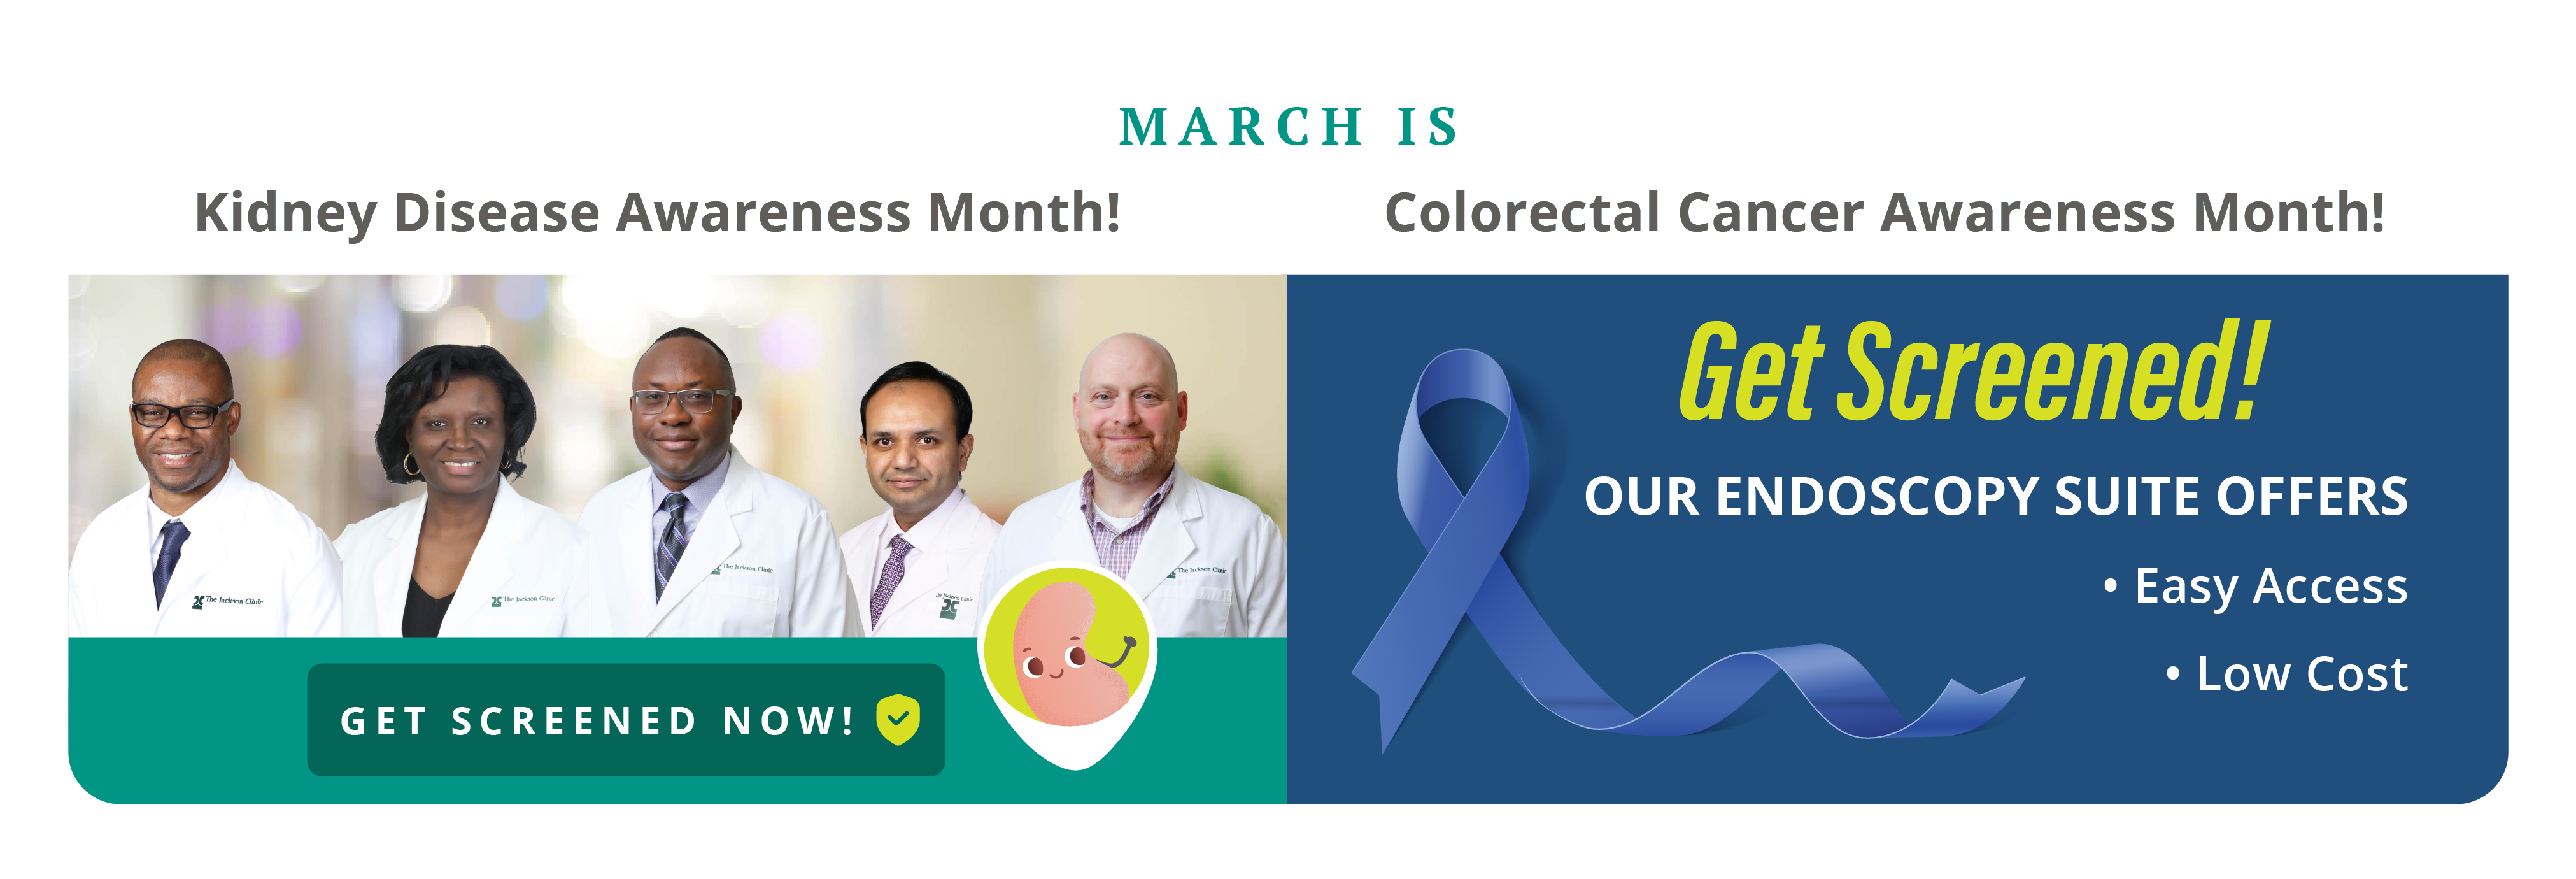 March is Kidney Disease & Colorectal Cancer Awareness Month! Get Screened Now!